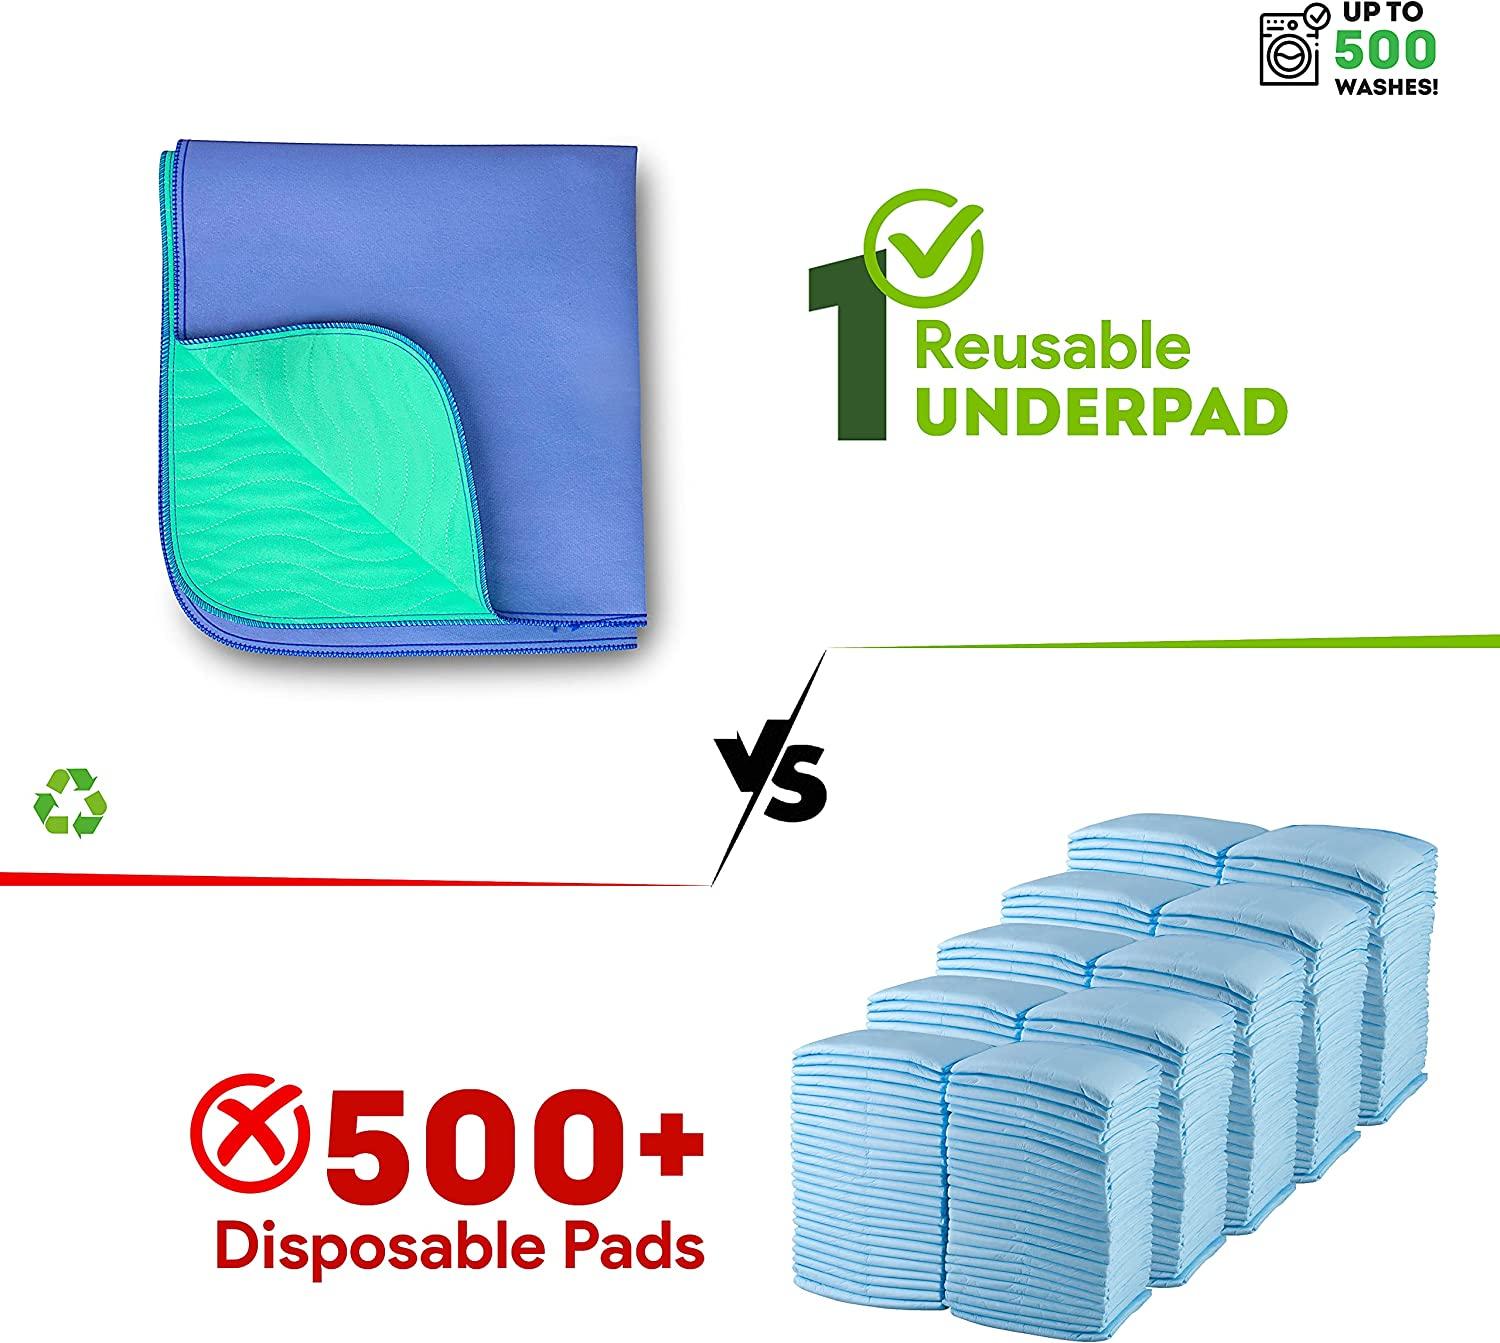 Incontinence Bed Pads Washable Waterproof Chucks Pads Washable Reusable  Underpads Hospital Bed Pads for Adult Pee Pad for Dog Cat Pet 4 Pack 34 x  36